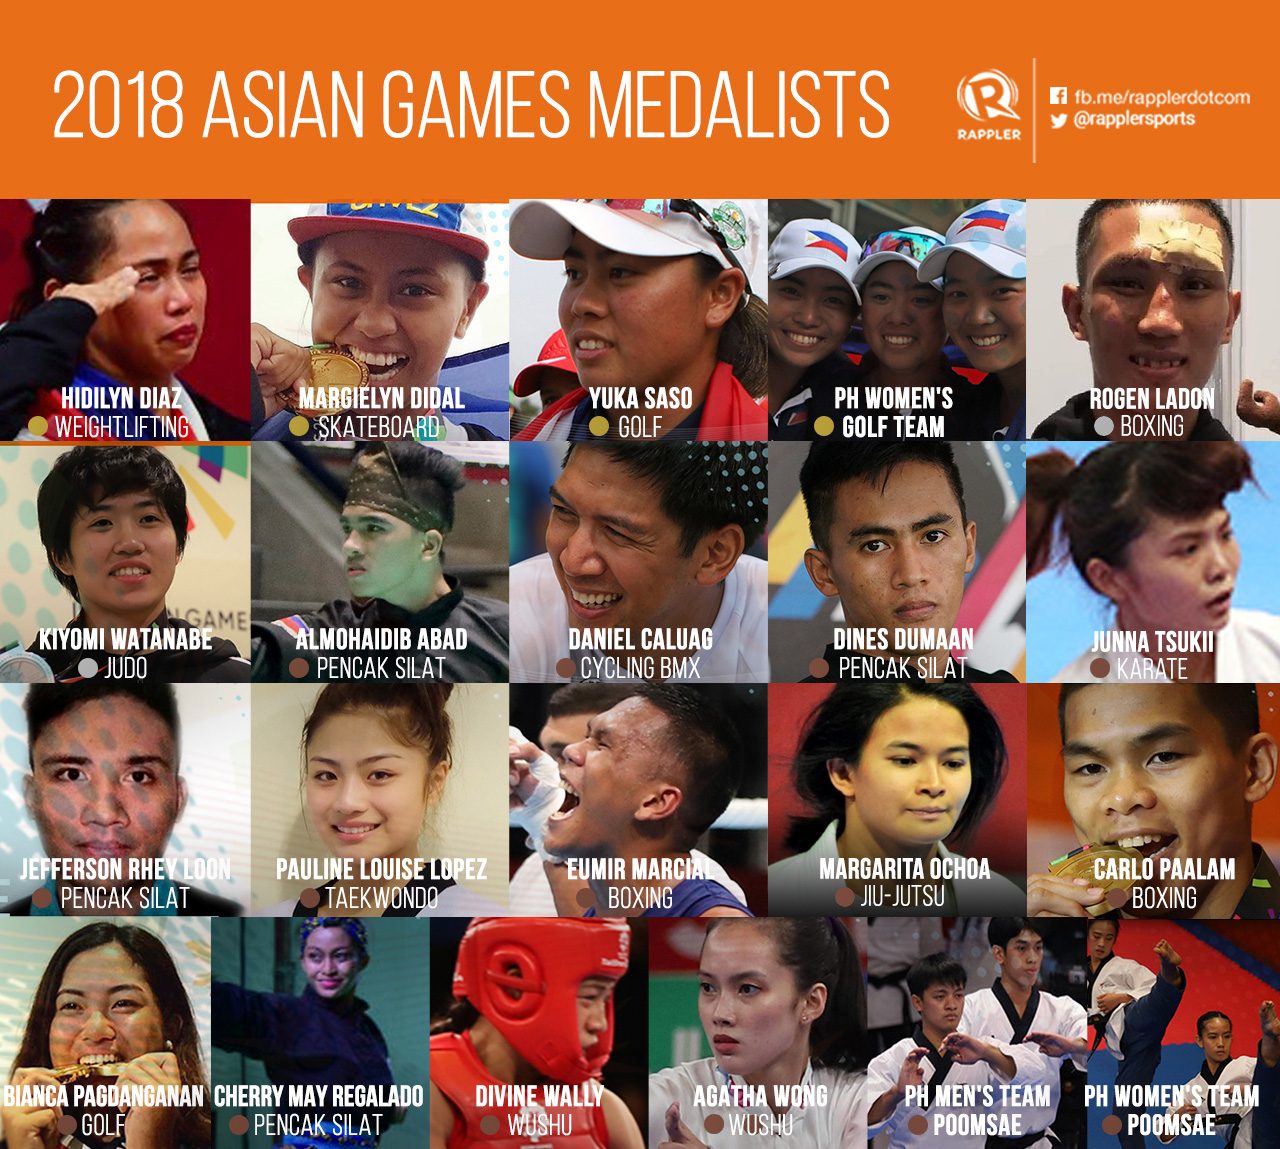 Team PH basks in golden glory, but more work to do